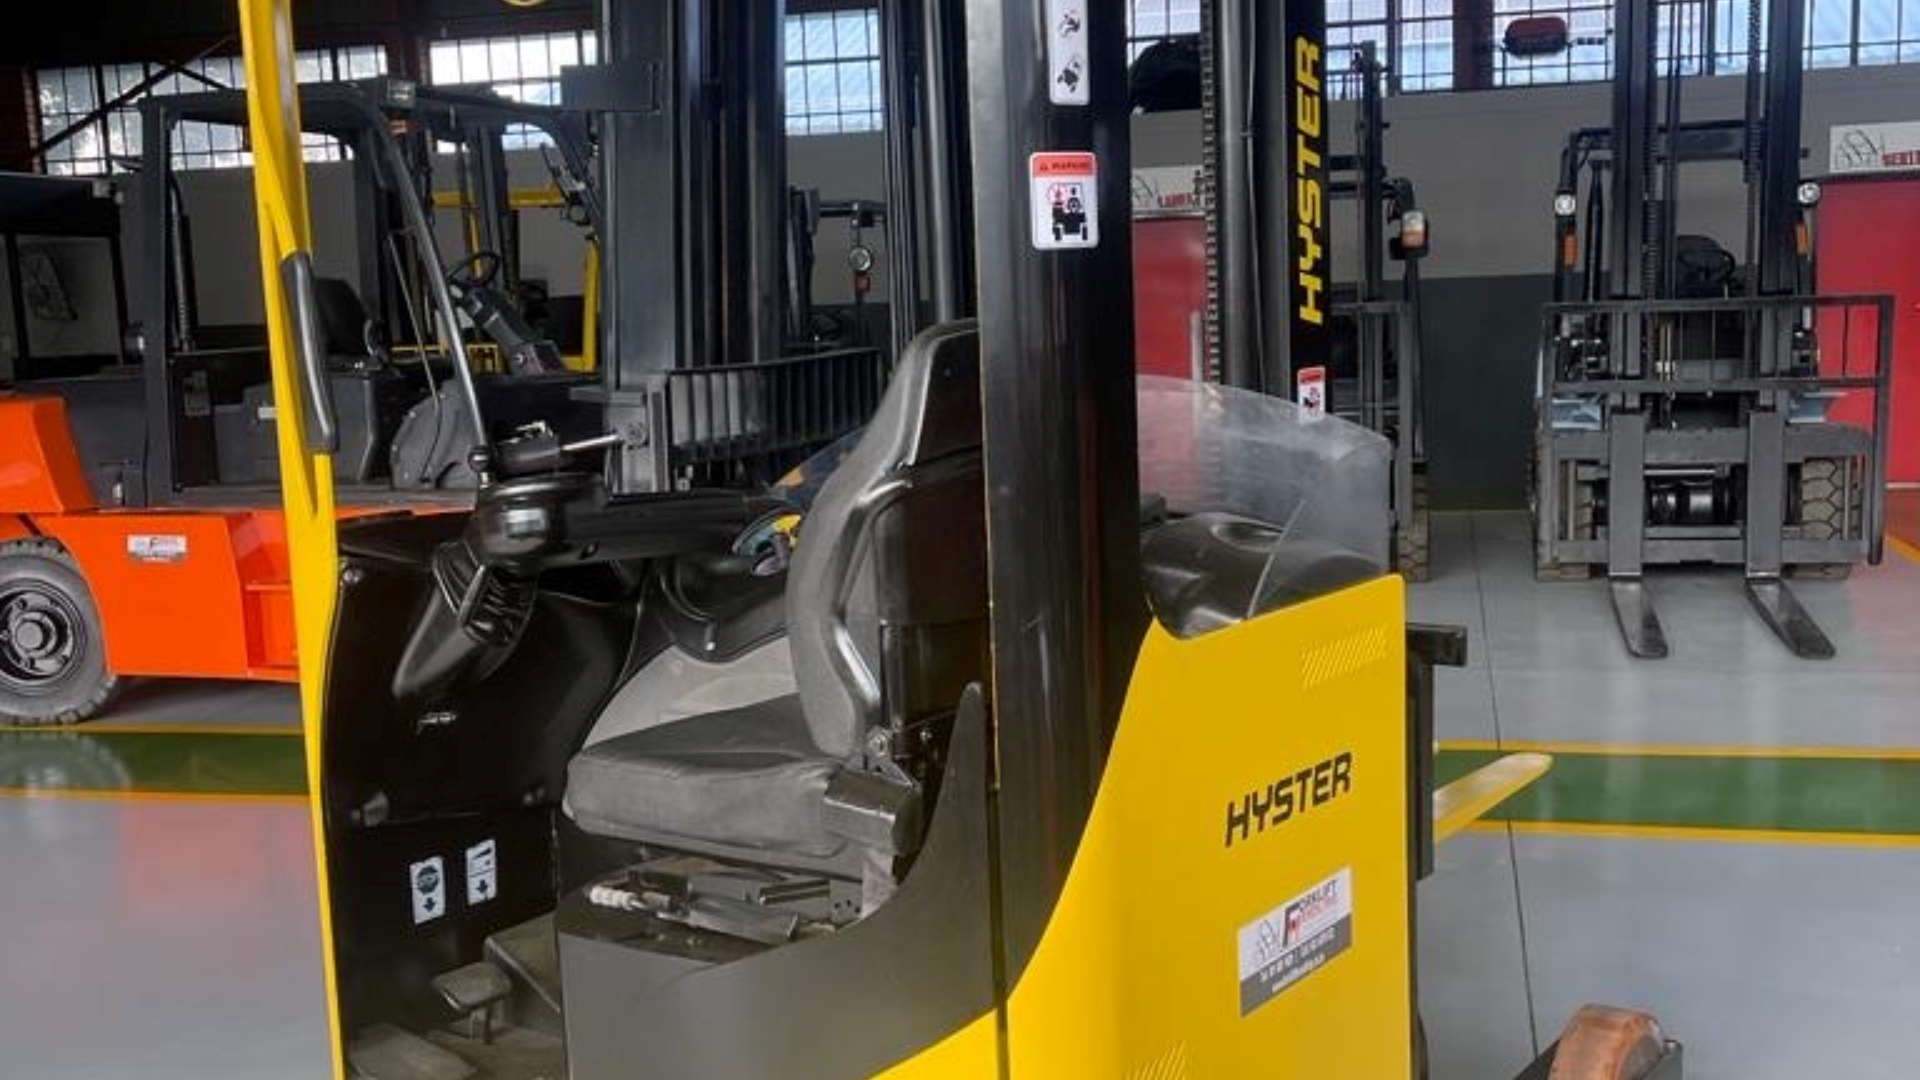 Hyster Forklifts Electric forklift Hyster 1.6 Ton Electric Reach Truck for sale by Forklift Handling | Truck & Trailer Marketplace